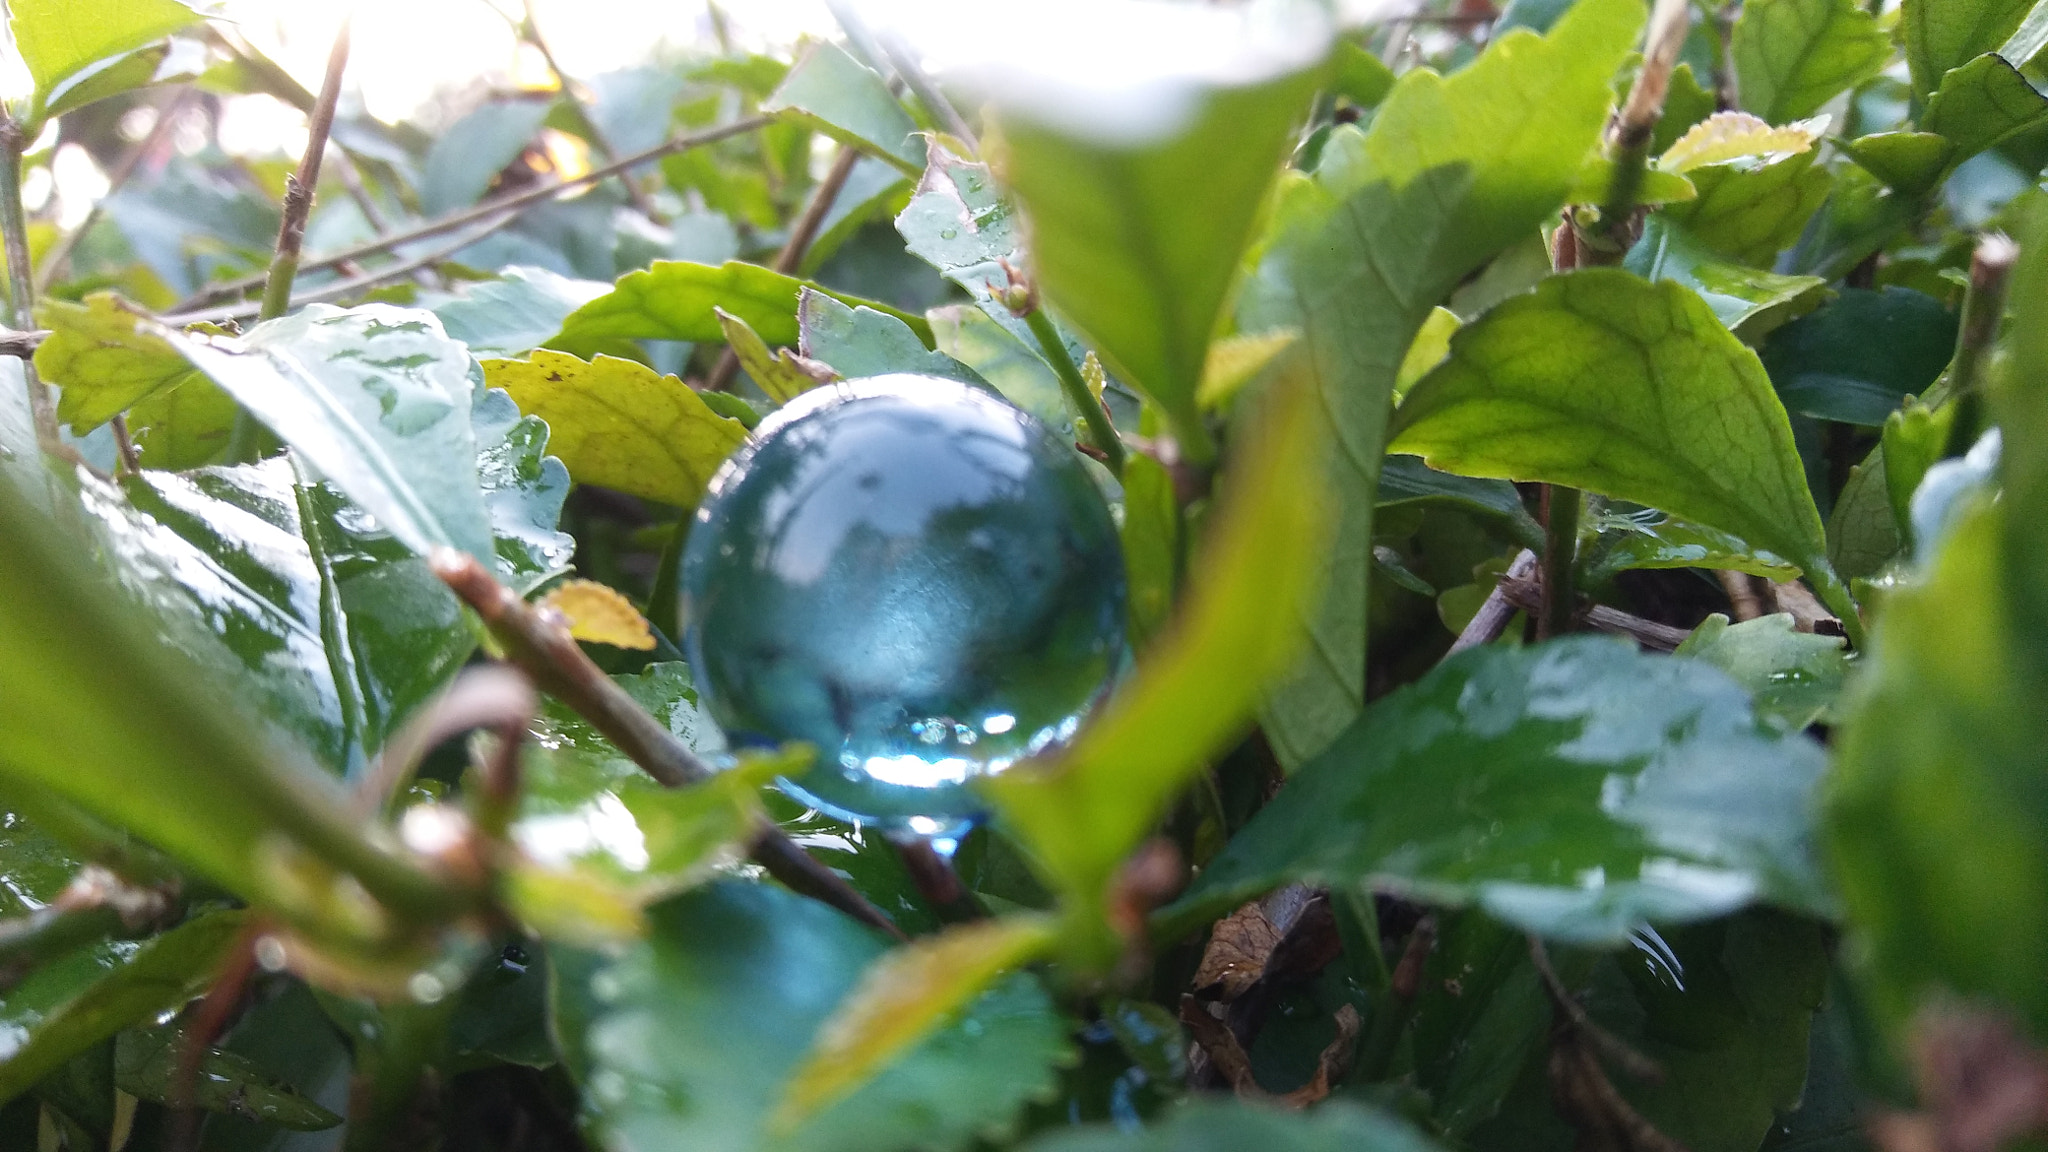 LG K520 sample photo. Leaf and marbles photography